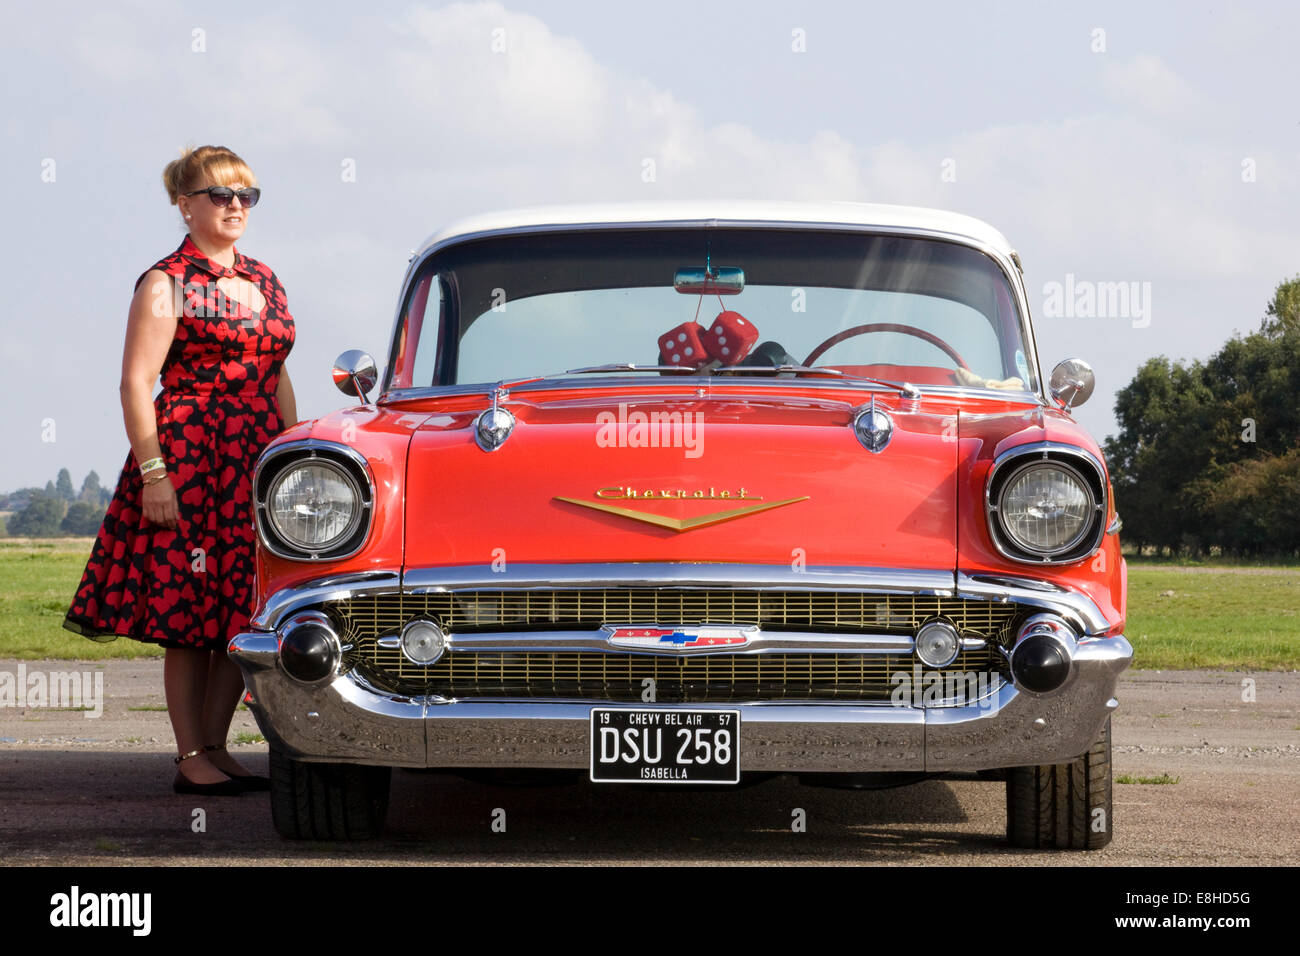 1957 Chevrolet. Chevy. Classic American car with Lady dressed in 1950s  clothing Stock Photo - Alamy